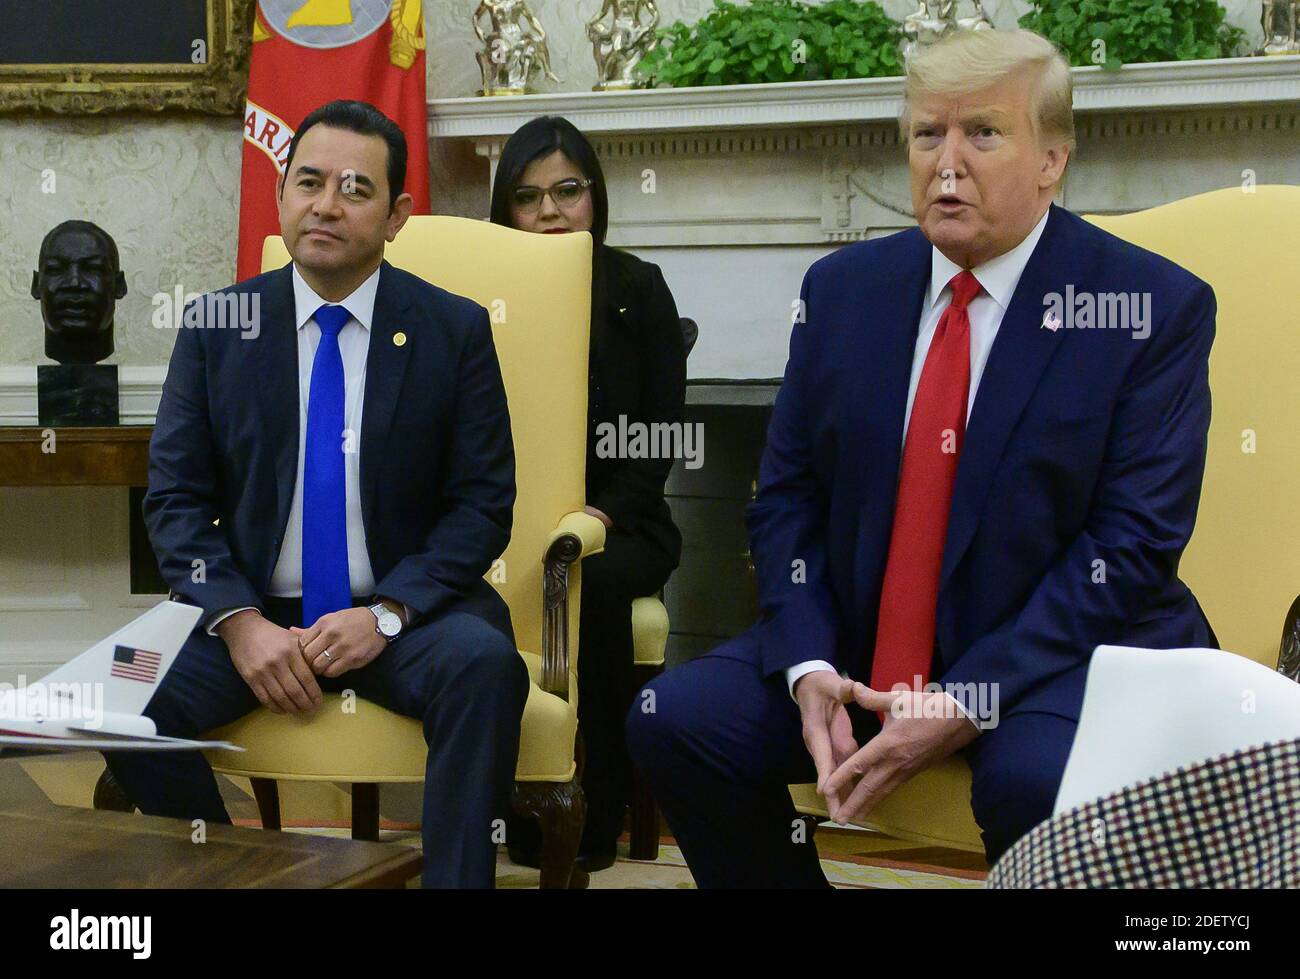 United States President Donald J. Trump makes remarks as he welcomes President Jimmy Morales of the Republic of Guatemala to the Oval Office of the White House in Washington, DC on Tuesday, December 17, 2019. Photo by Ron Sachs/CNP/ABACAPRESS.COM Stock Photo